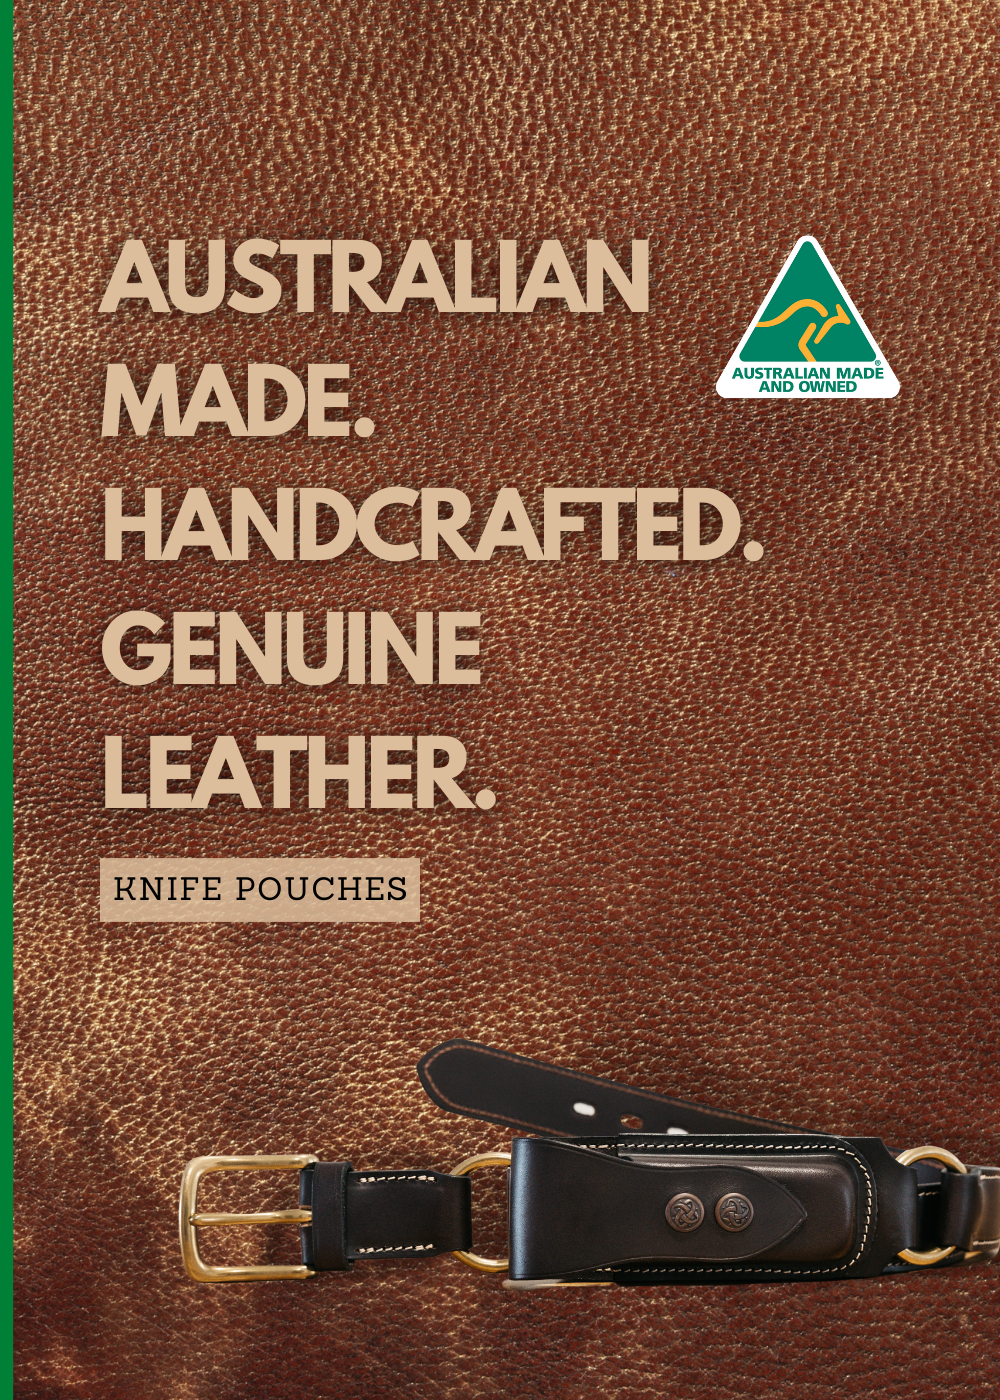 ABL - Quality Handcrafted Australian Made Leather Goods